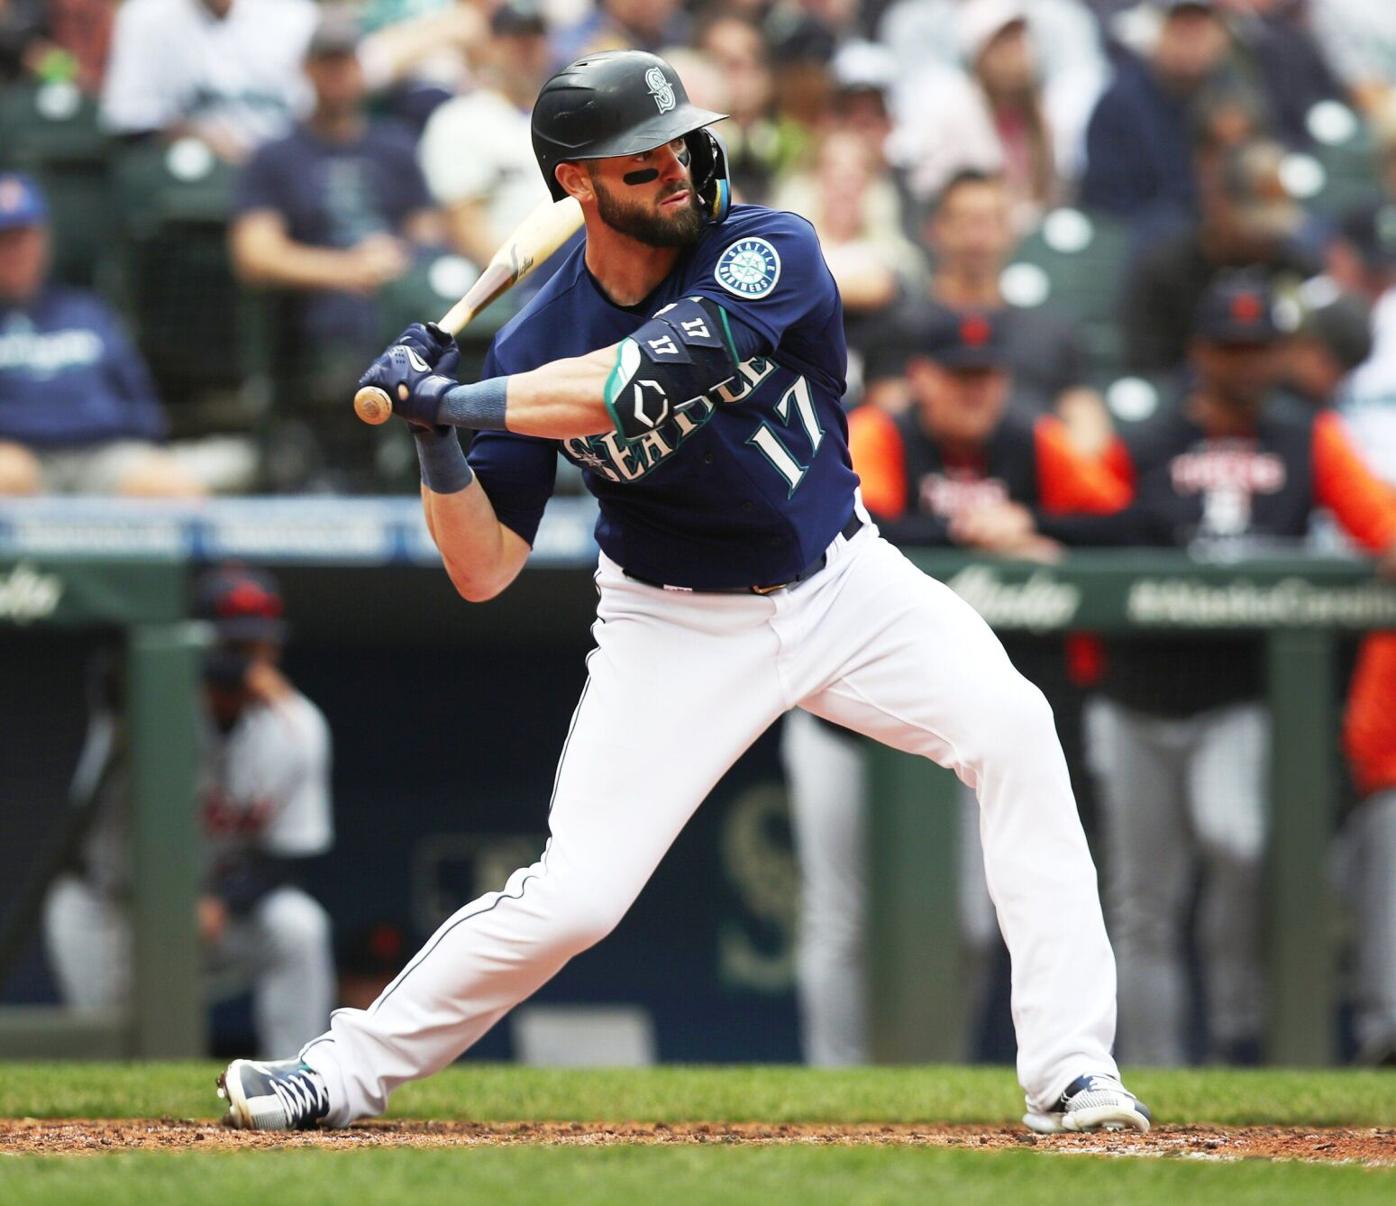 Mariners Outfielder Mitch Haniger Named American League Player of the Week, by Mariners PR